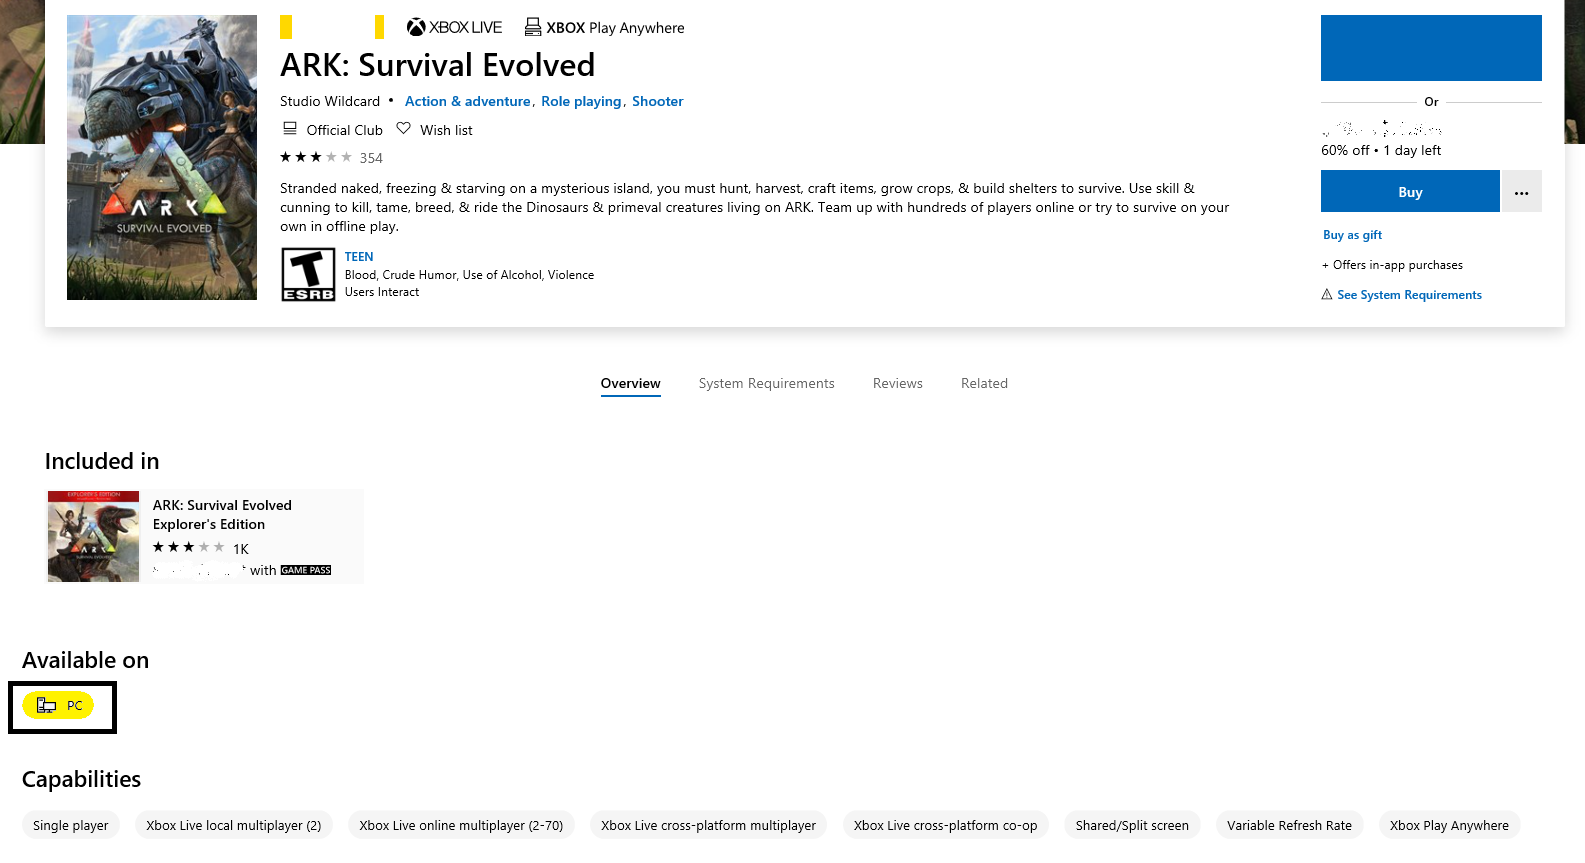 Ark survival evolved for windows 5567ef09-31cd-4f2a-a8a4-a4acf13167fe?upload=true.png